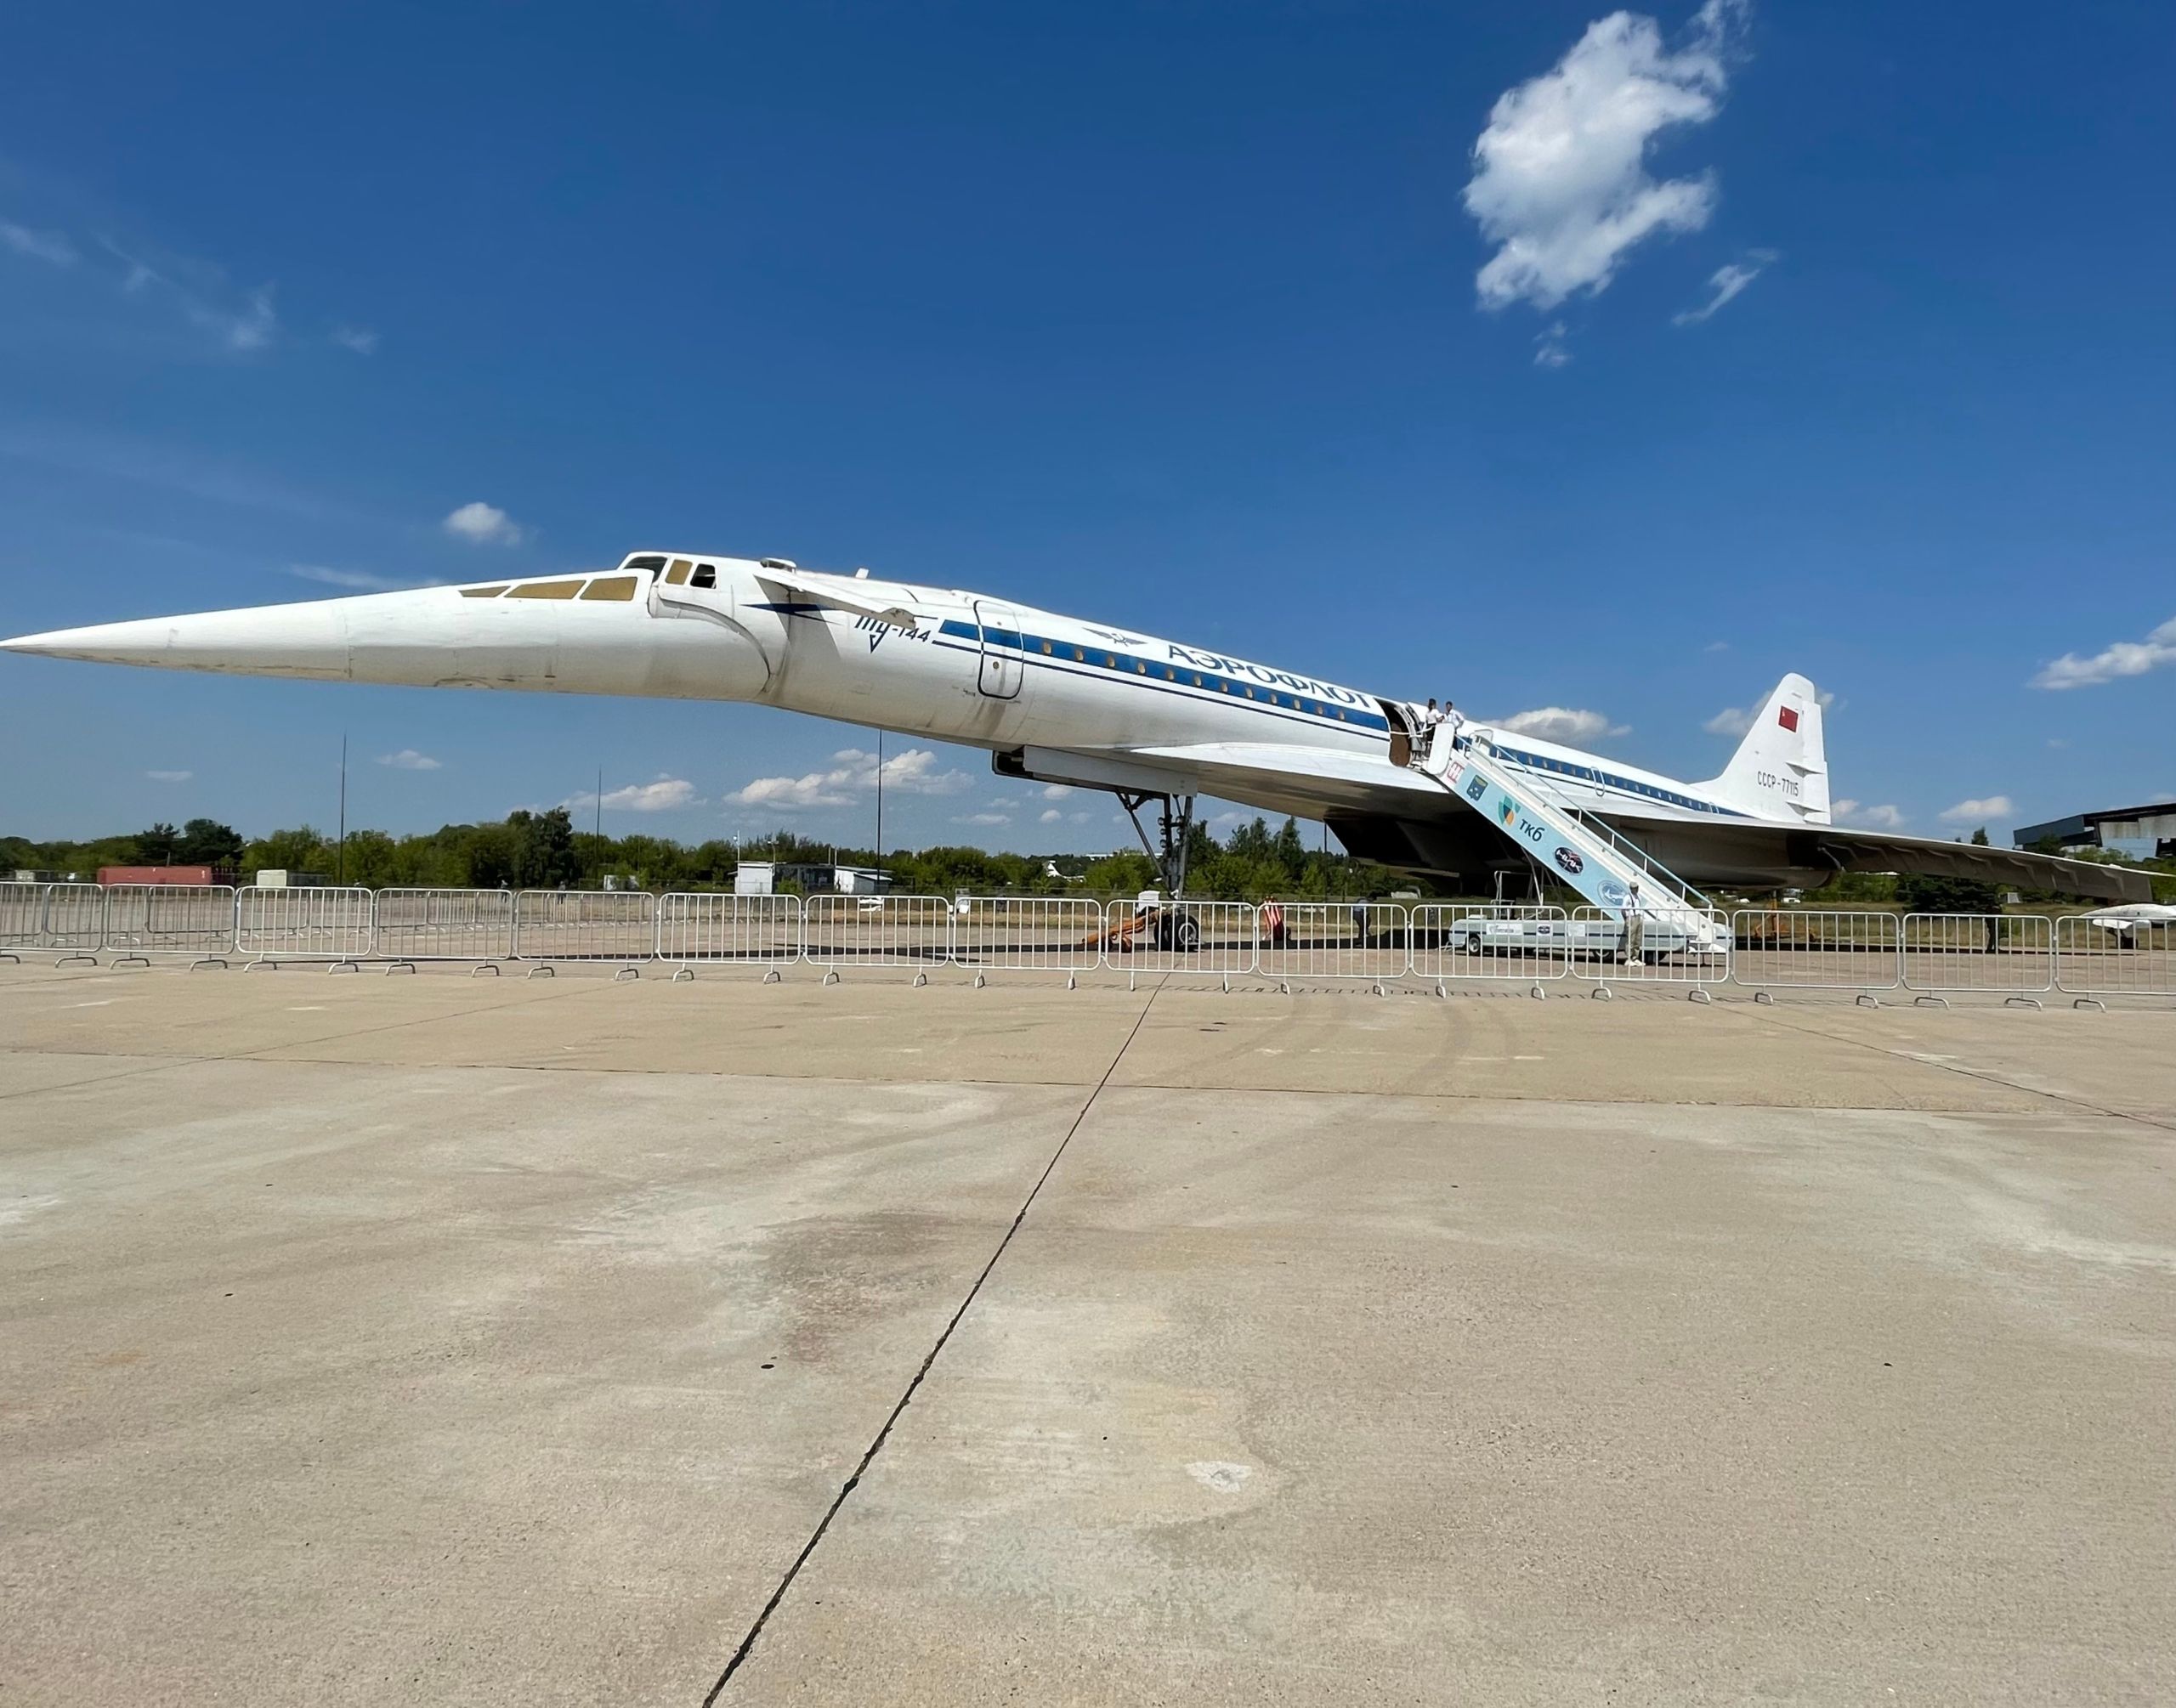 supersonic-beginnings-russia-s-tupolev-tu-144-first-flew-53-years-ago